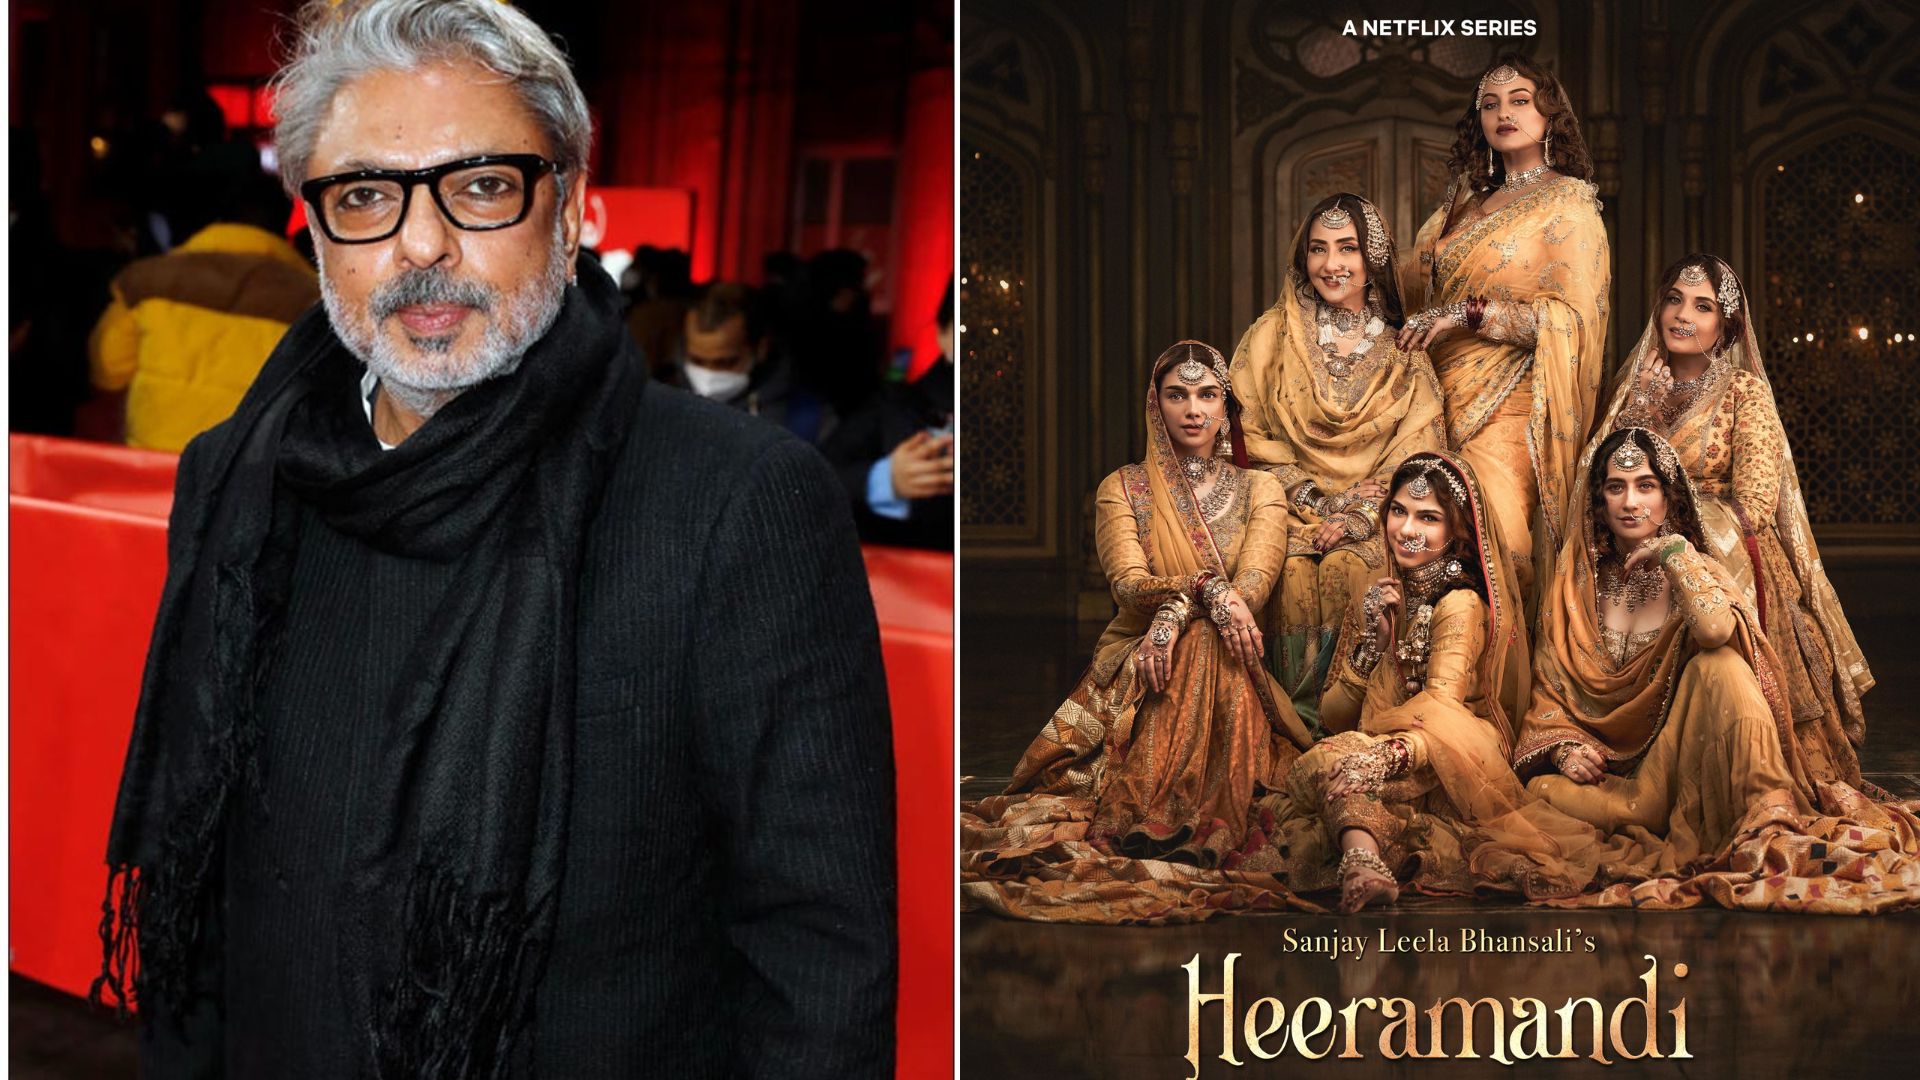 What Is The Story Of Heeramandi? Why Are Pakistanis Against Sanjay Leela Bhansali’s Web Series?